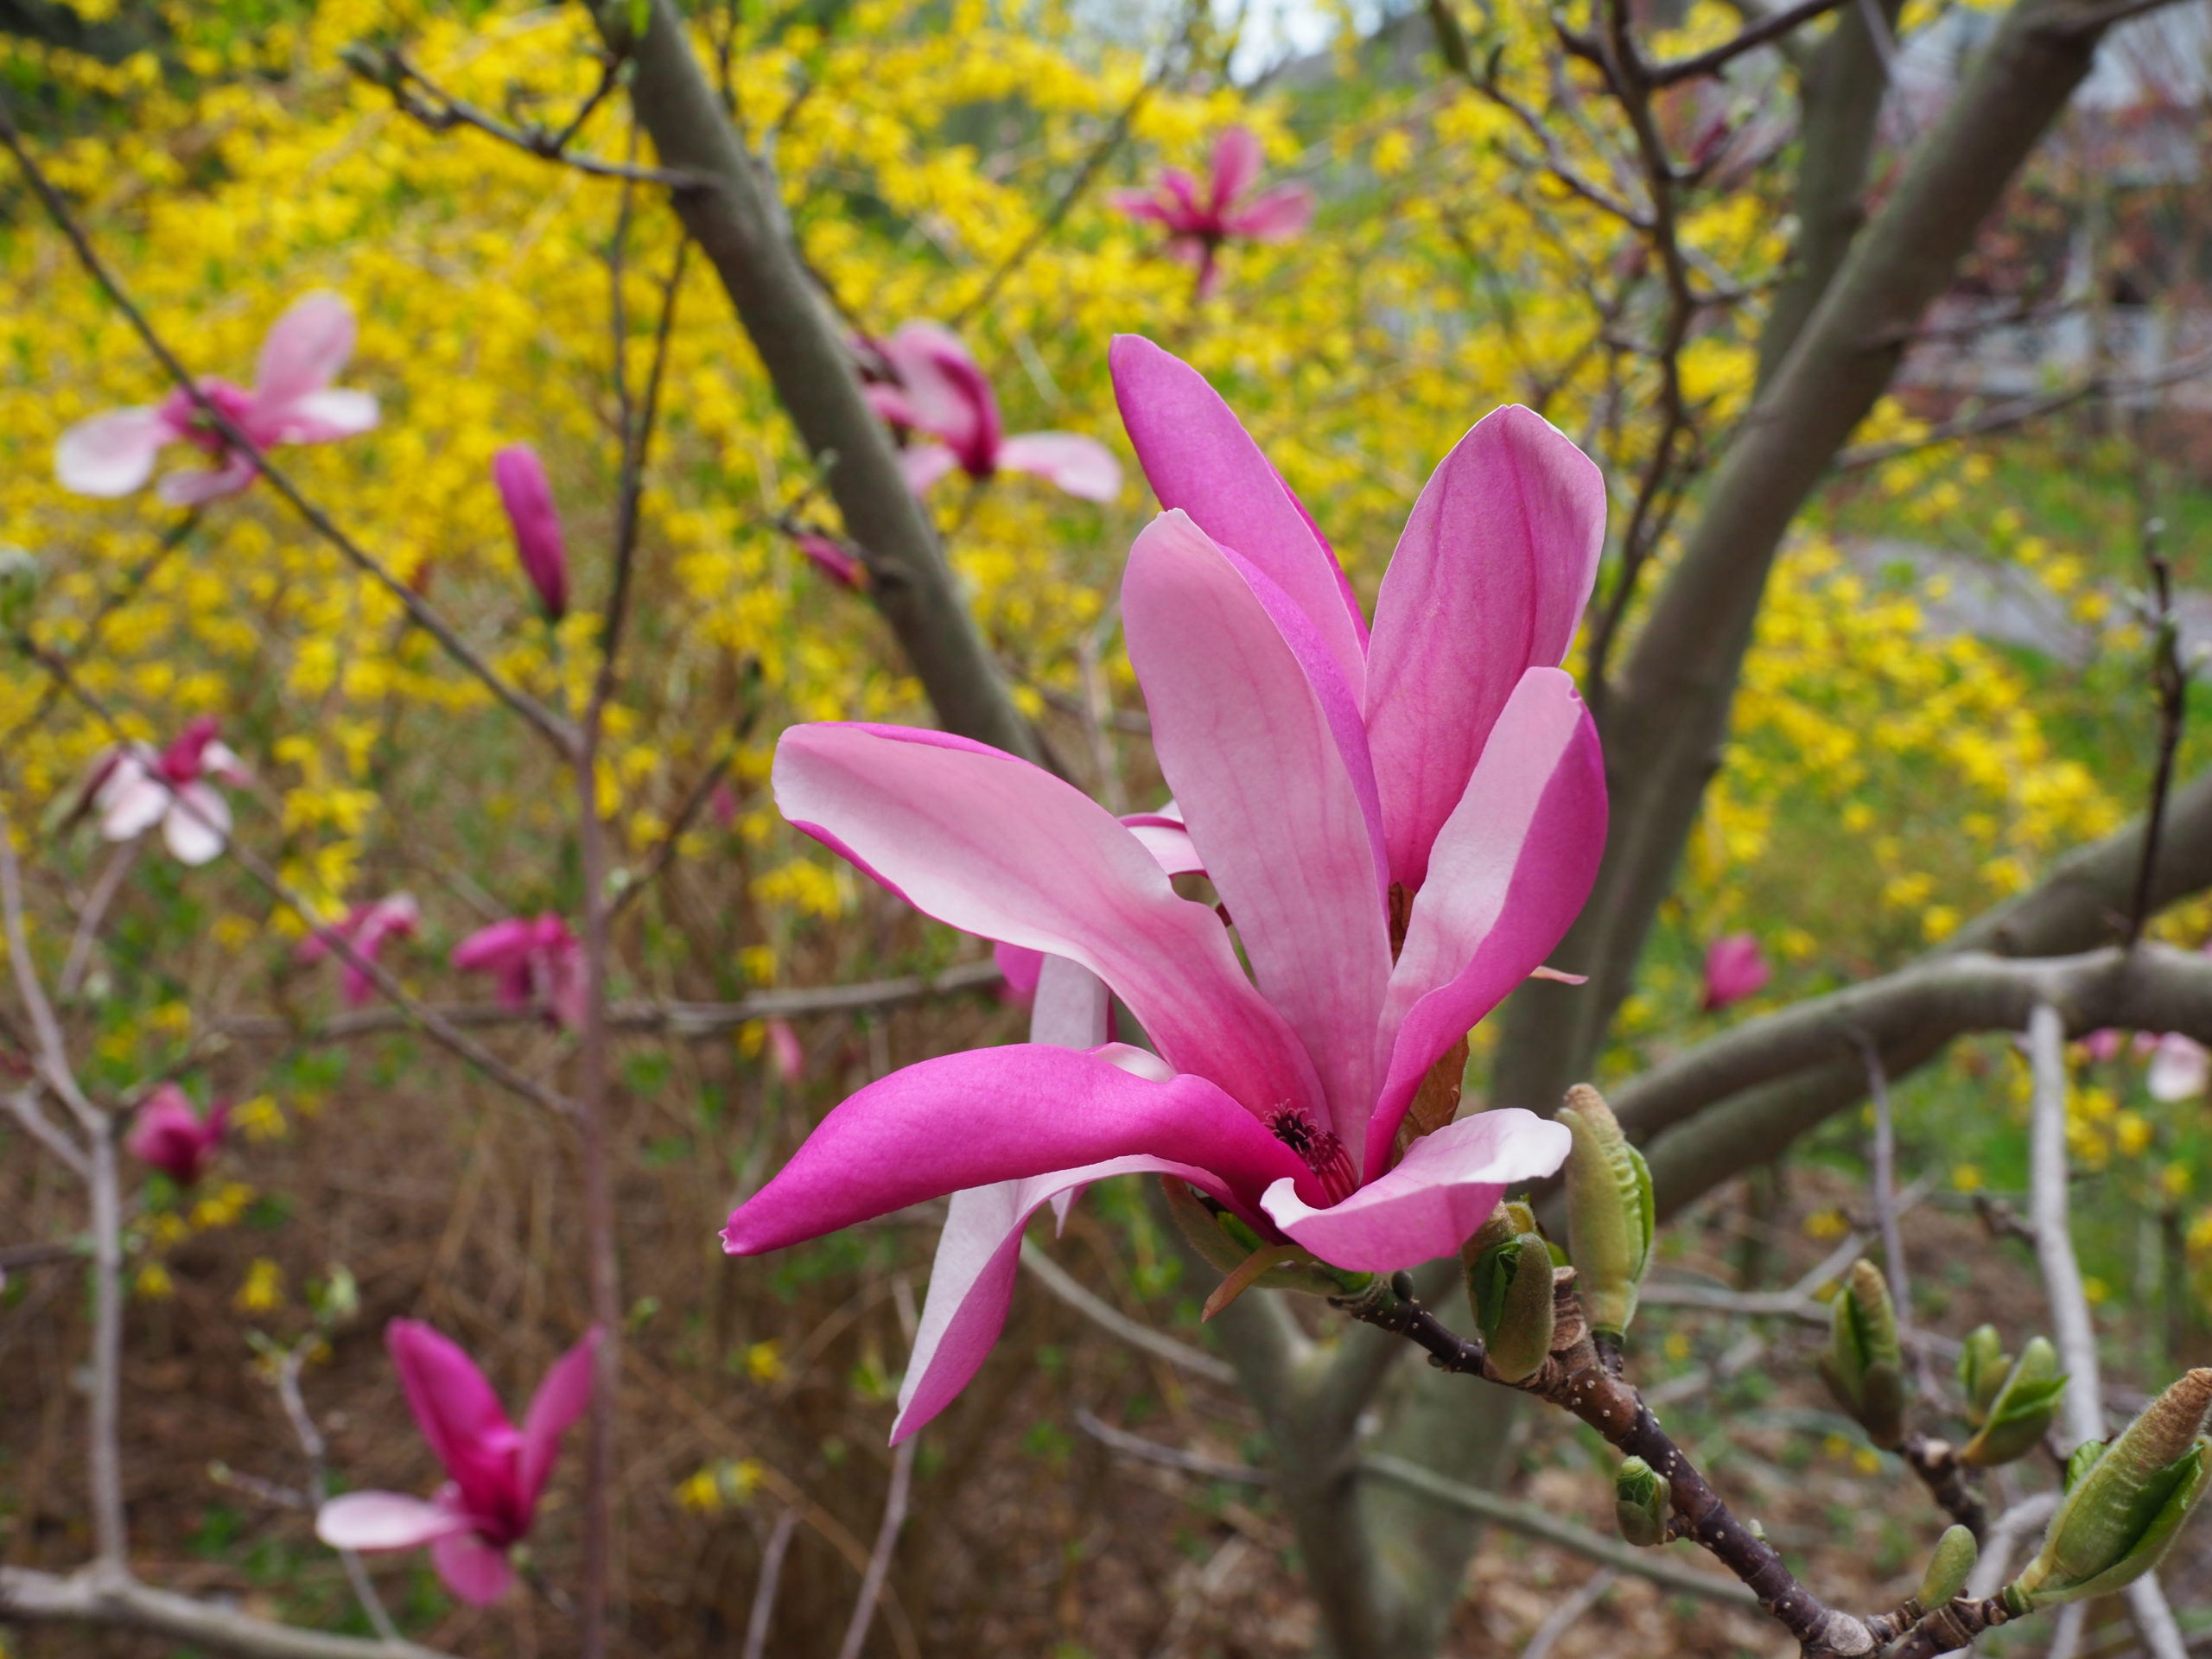 The Purple Star magnolia has striking color for a magnolia and is not easily found locally. In 2012, when this mail order tree arrived in a one gallon pot, it was less than 3 feet tall. A decade later, it is nearly 25 feet tall and 15 feet wide.